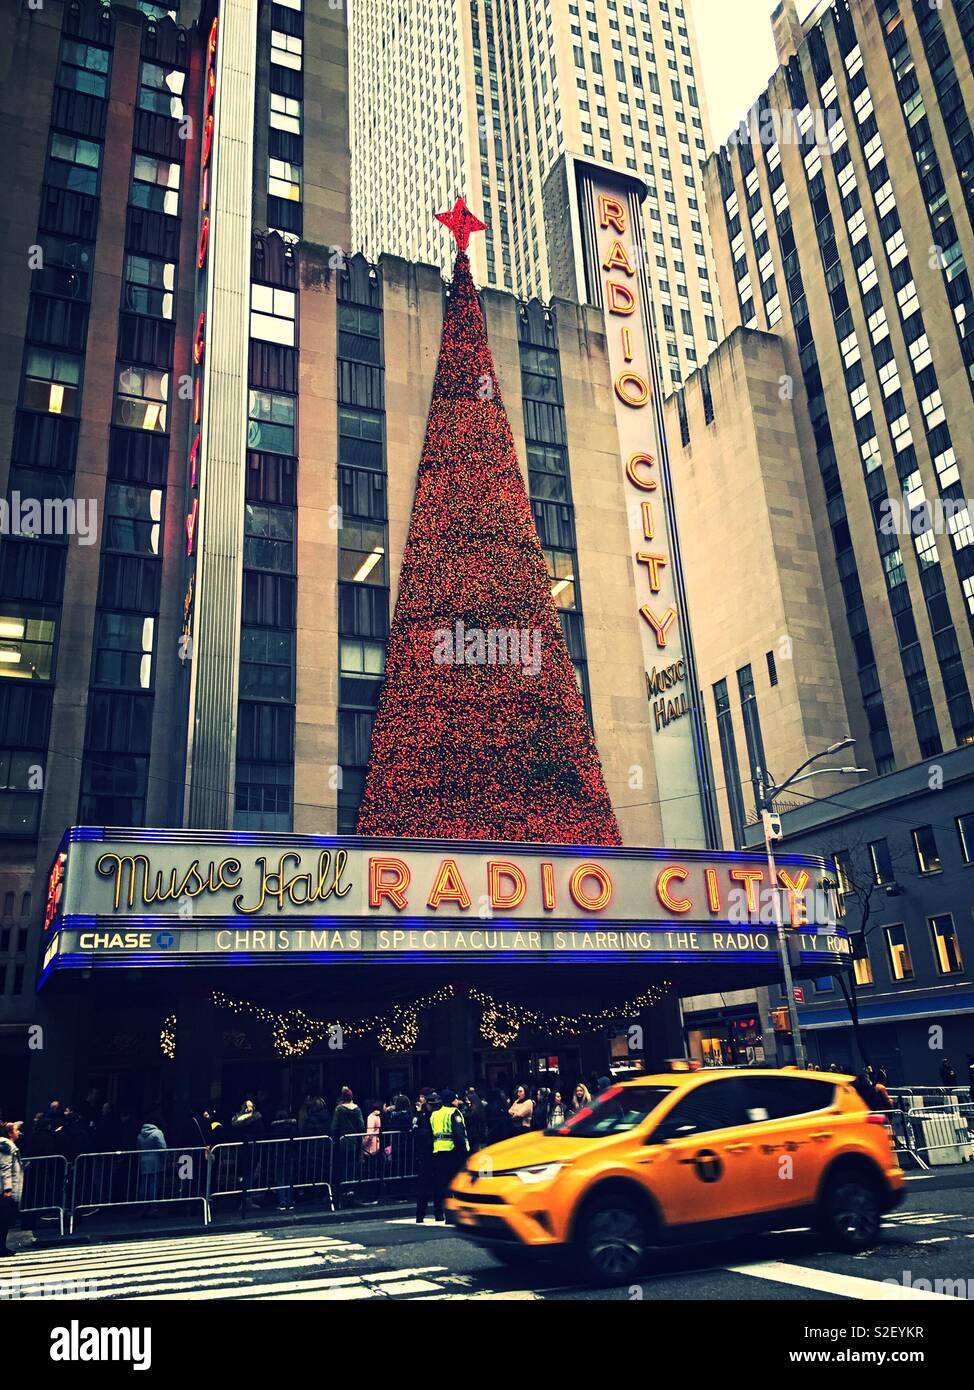 Radio city Music hall holiday decorations and main entrance on Avenue of the Americas, New York City, United States Stock Photo